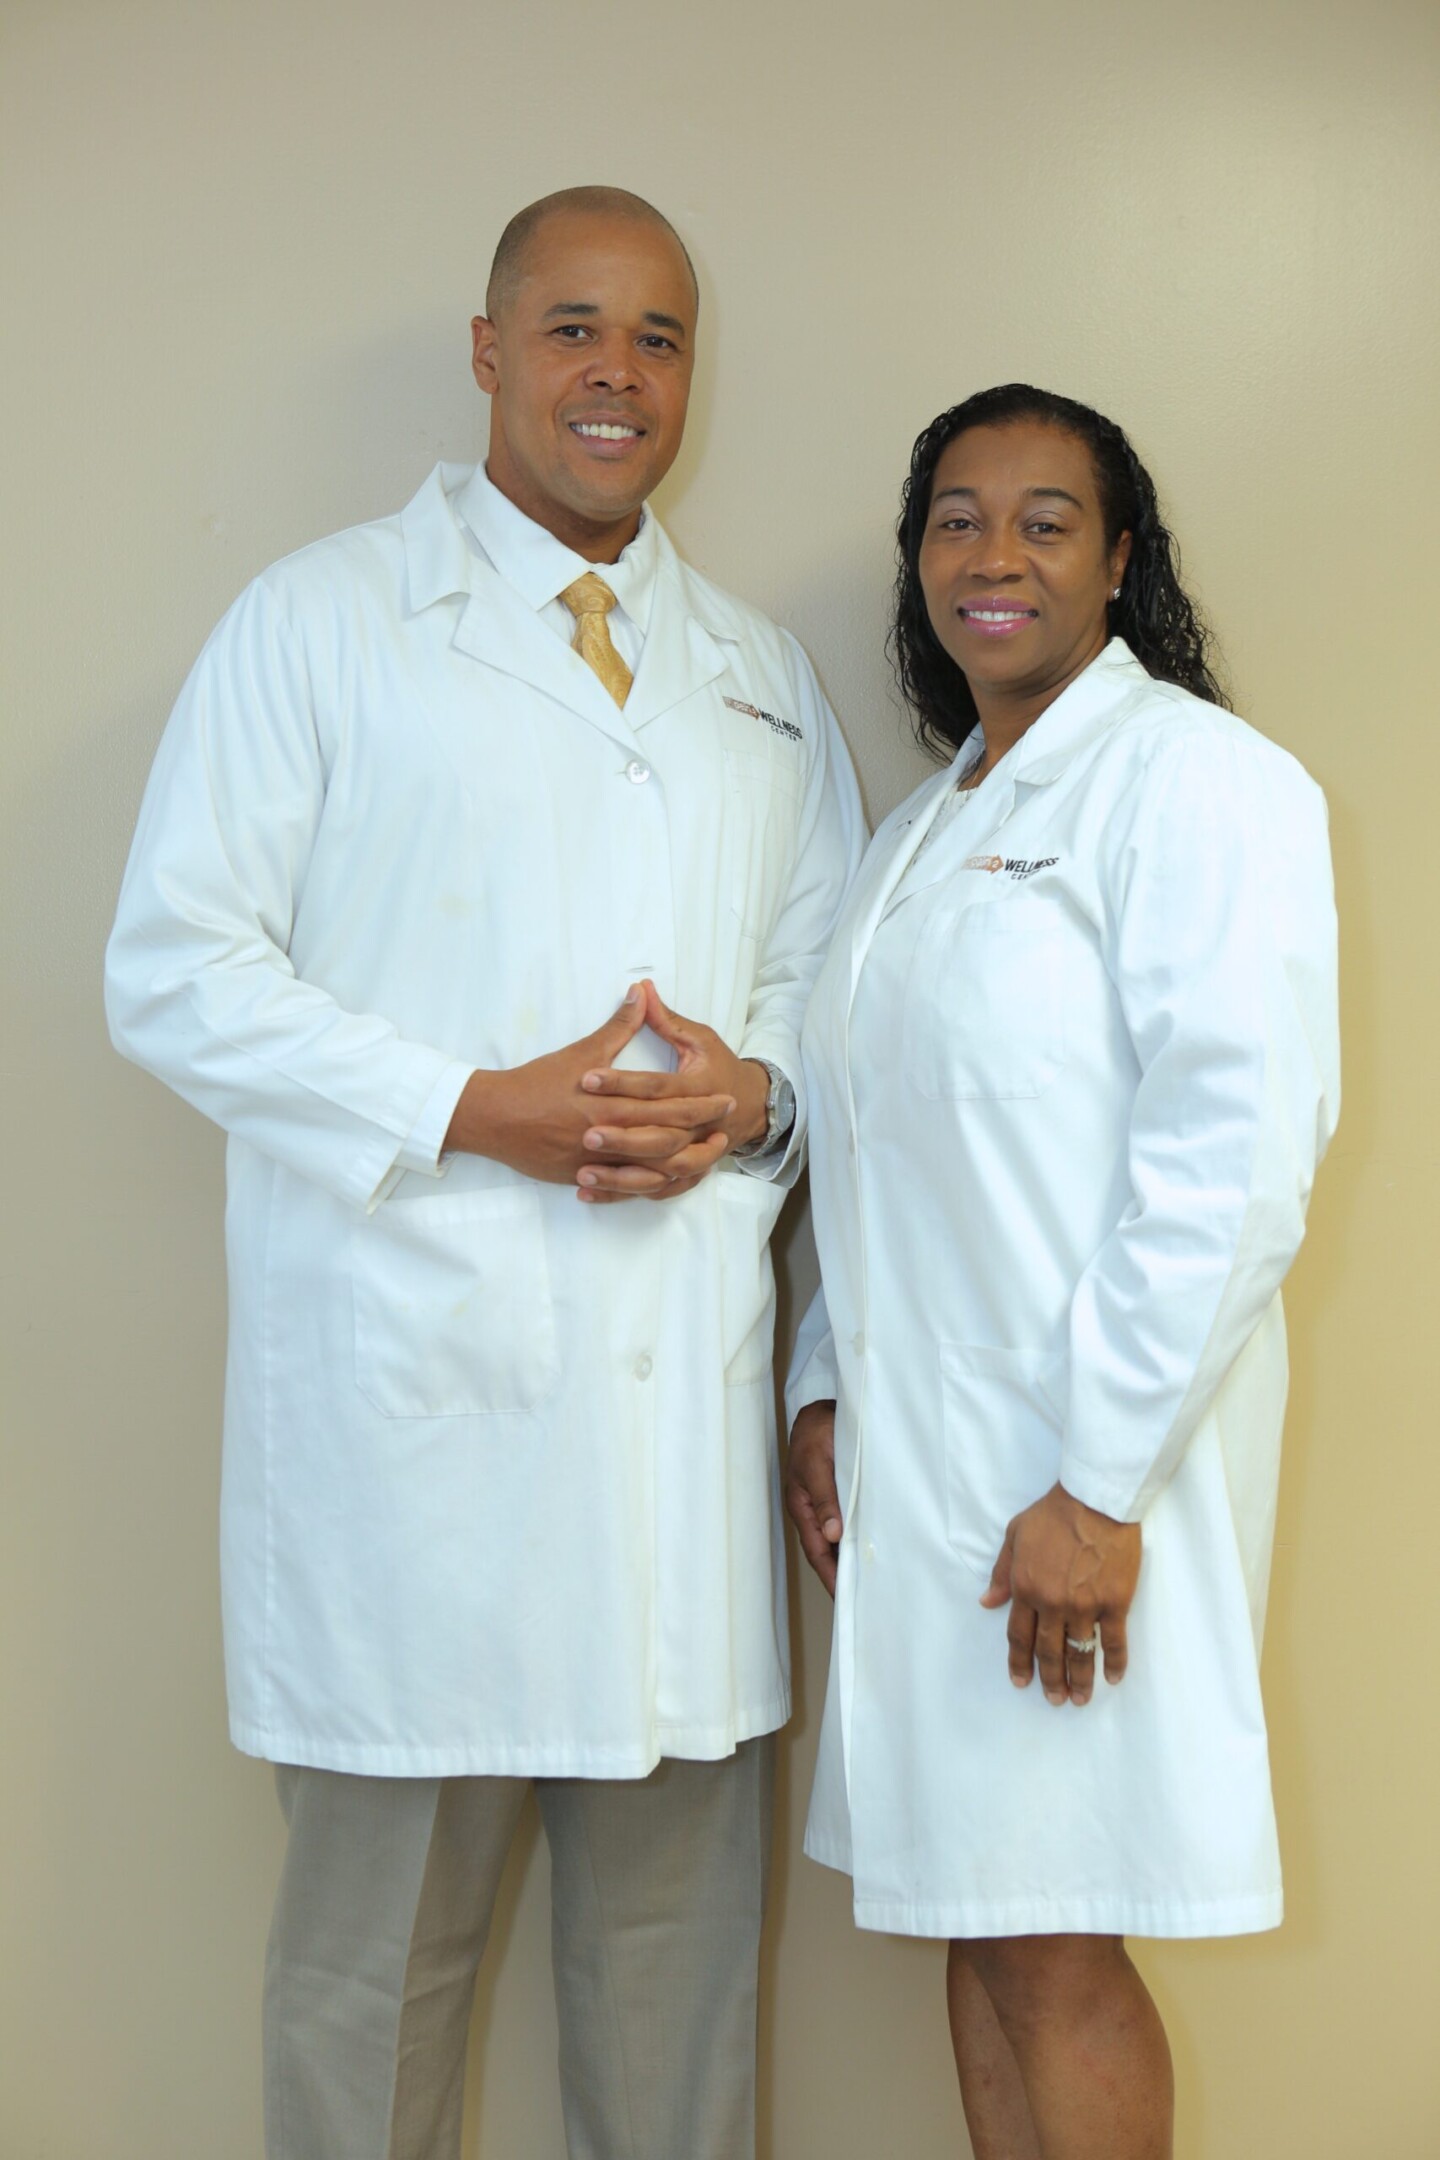 Drs. Winston and Chantaye Carhee of the Pain 2 Wellness Center Talk About Ways to Improve Your Immune System